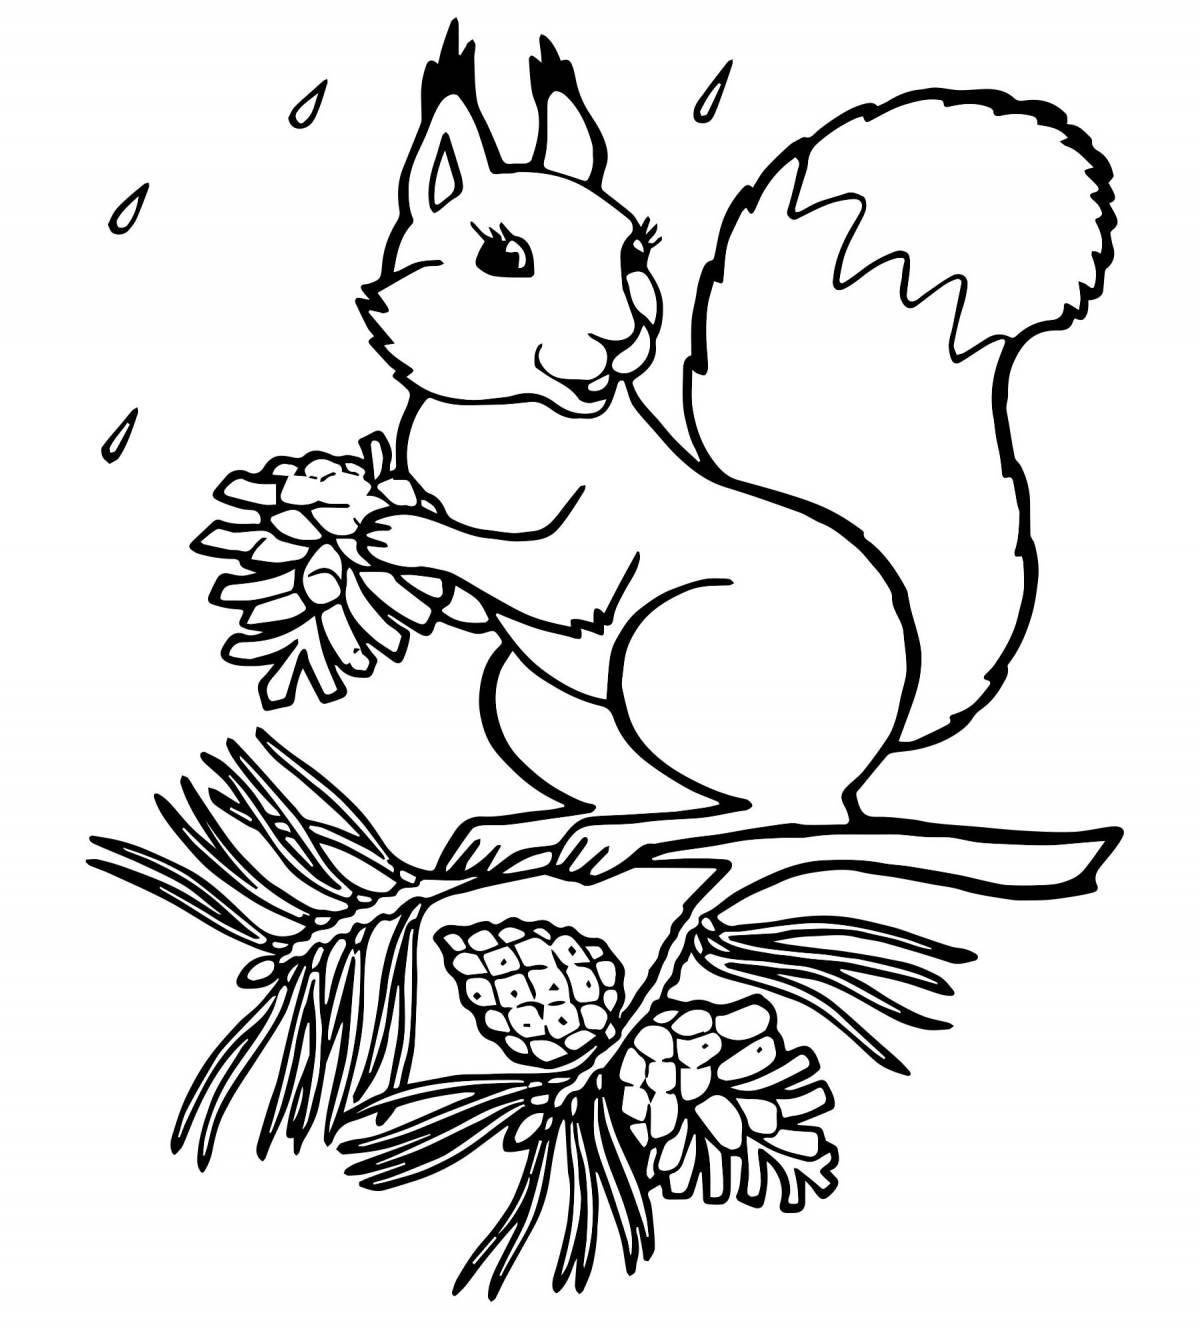 Funny squirrel coloring book for 3-4 year olds